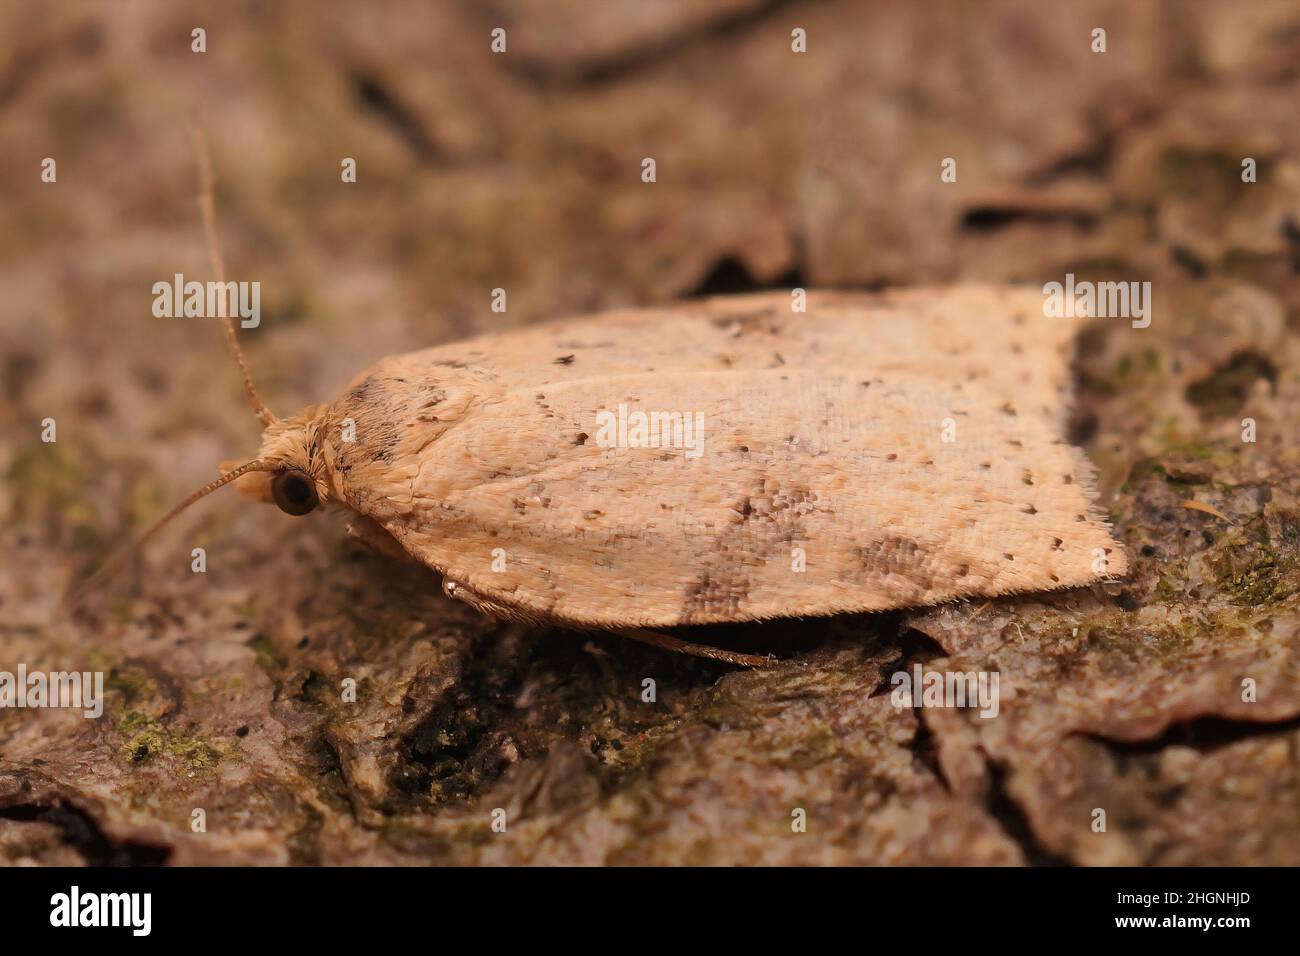 Closeup on a small lightbrown Tortrix moth, Acleris notata, sitting on wood in the garden Stock Photo